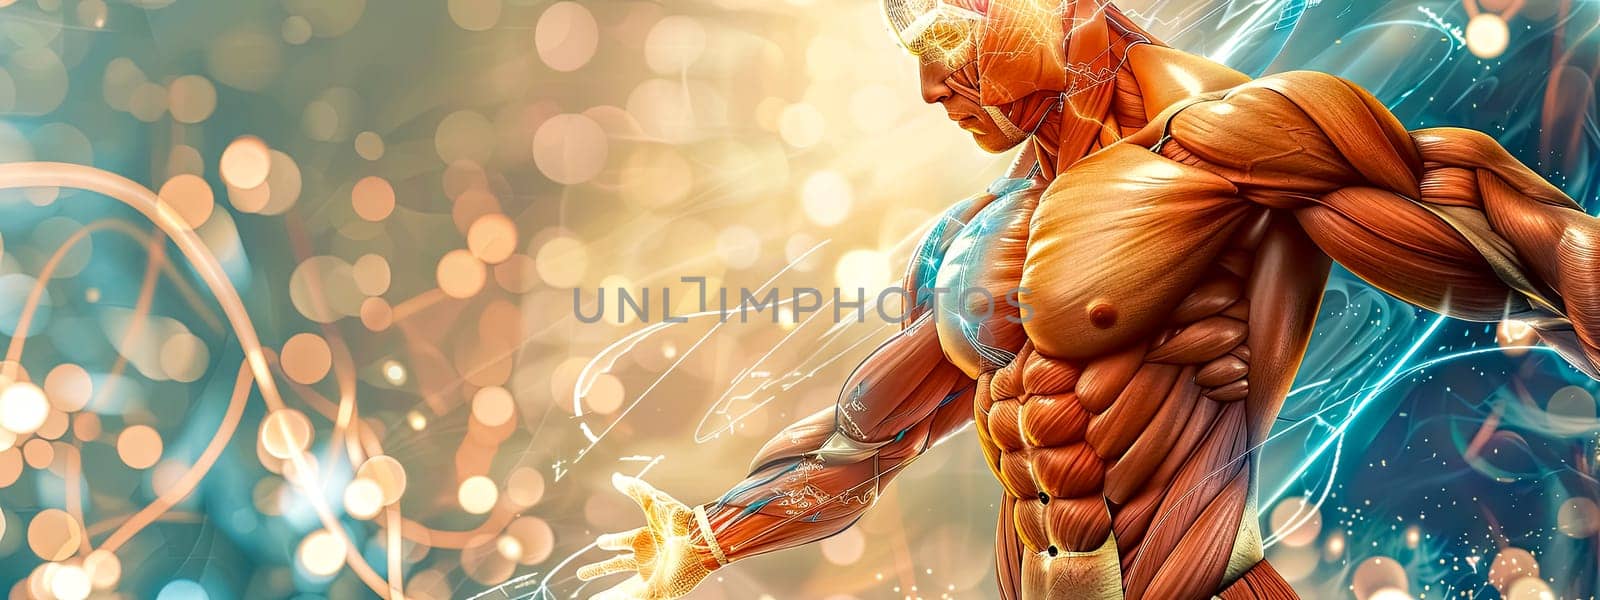 Electric charge superhero in dynamic action by Edophoto